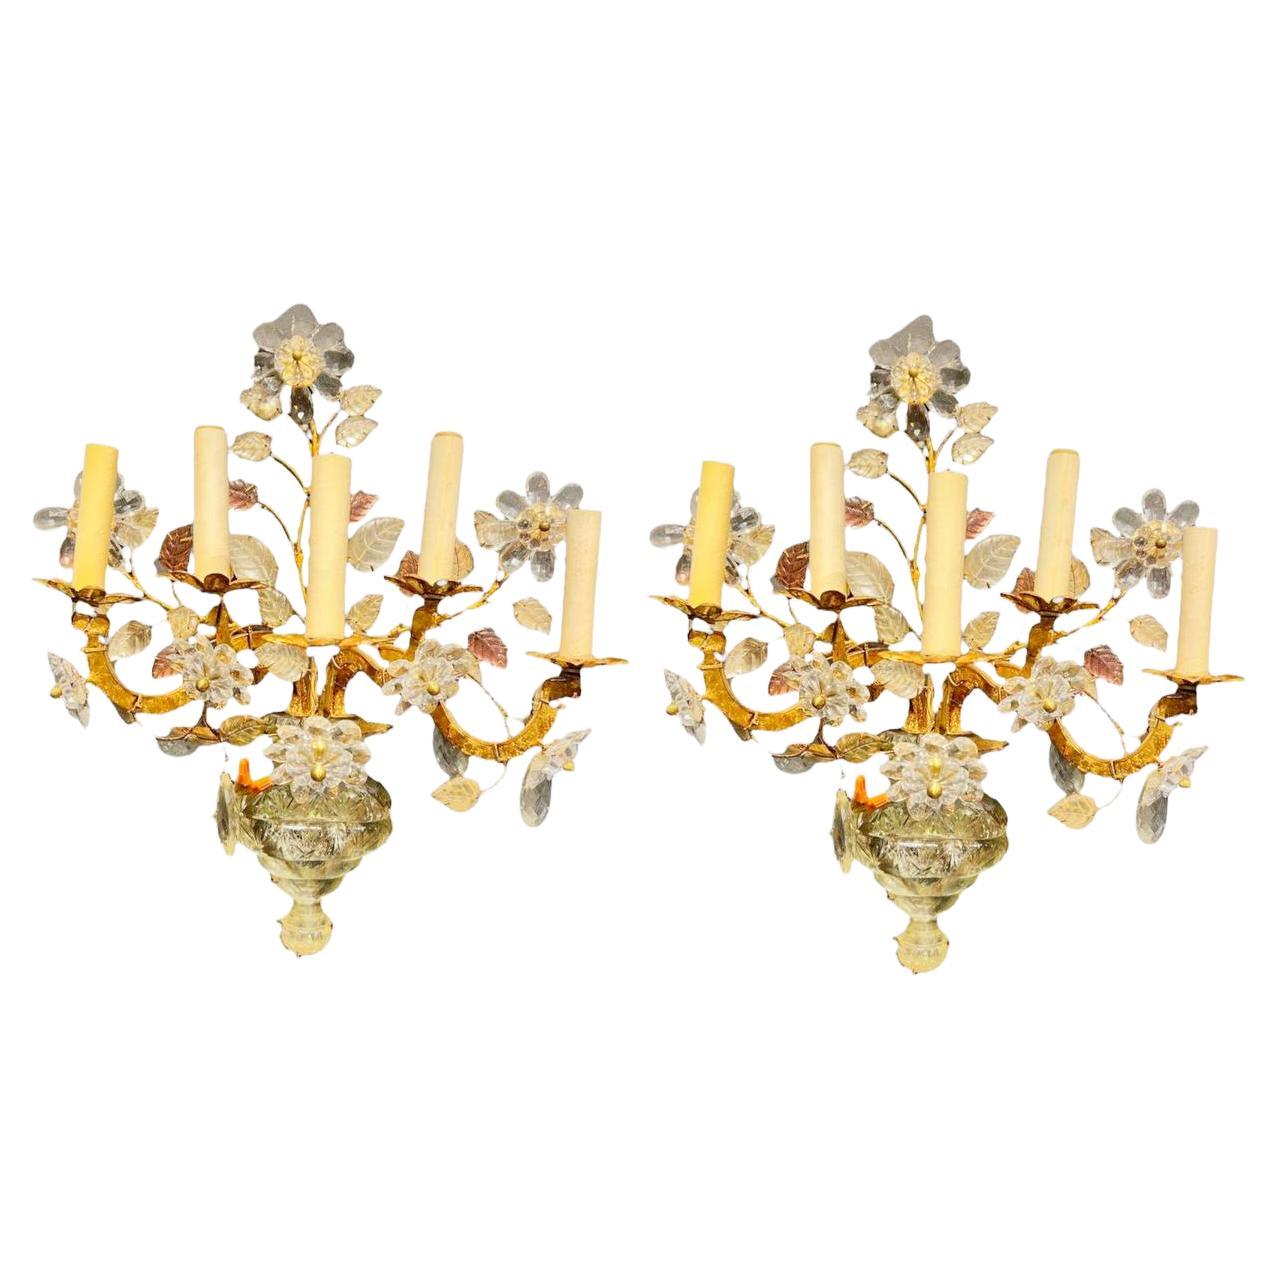 1920s French Crystal 5 Lights Sconces For Sale